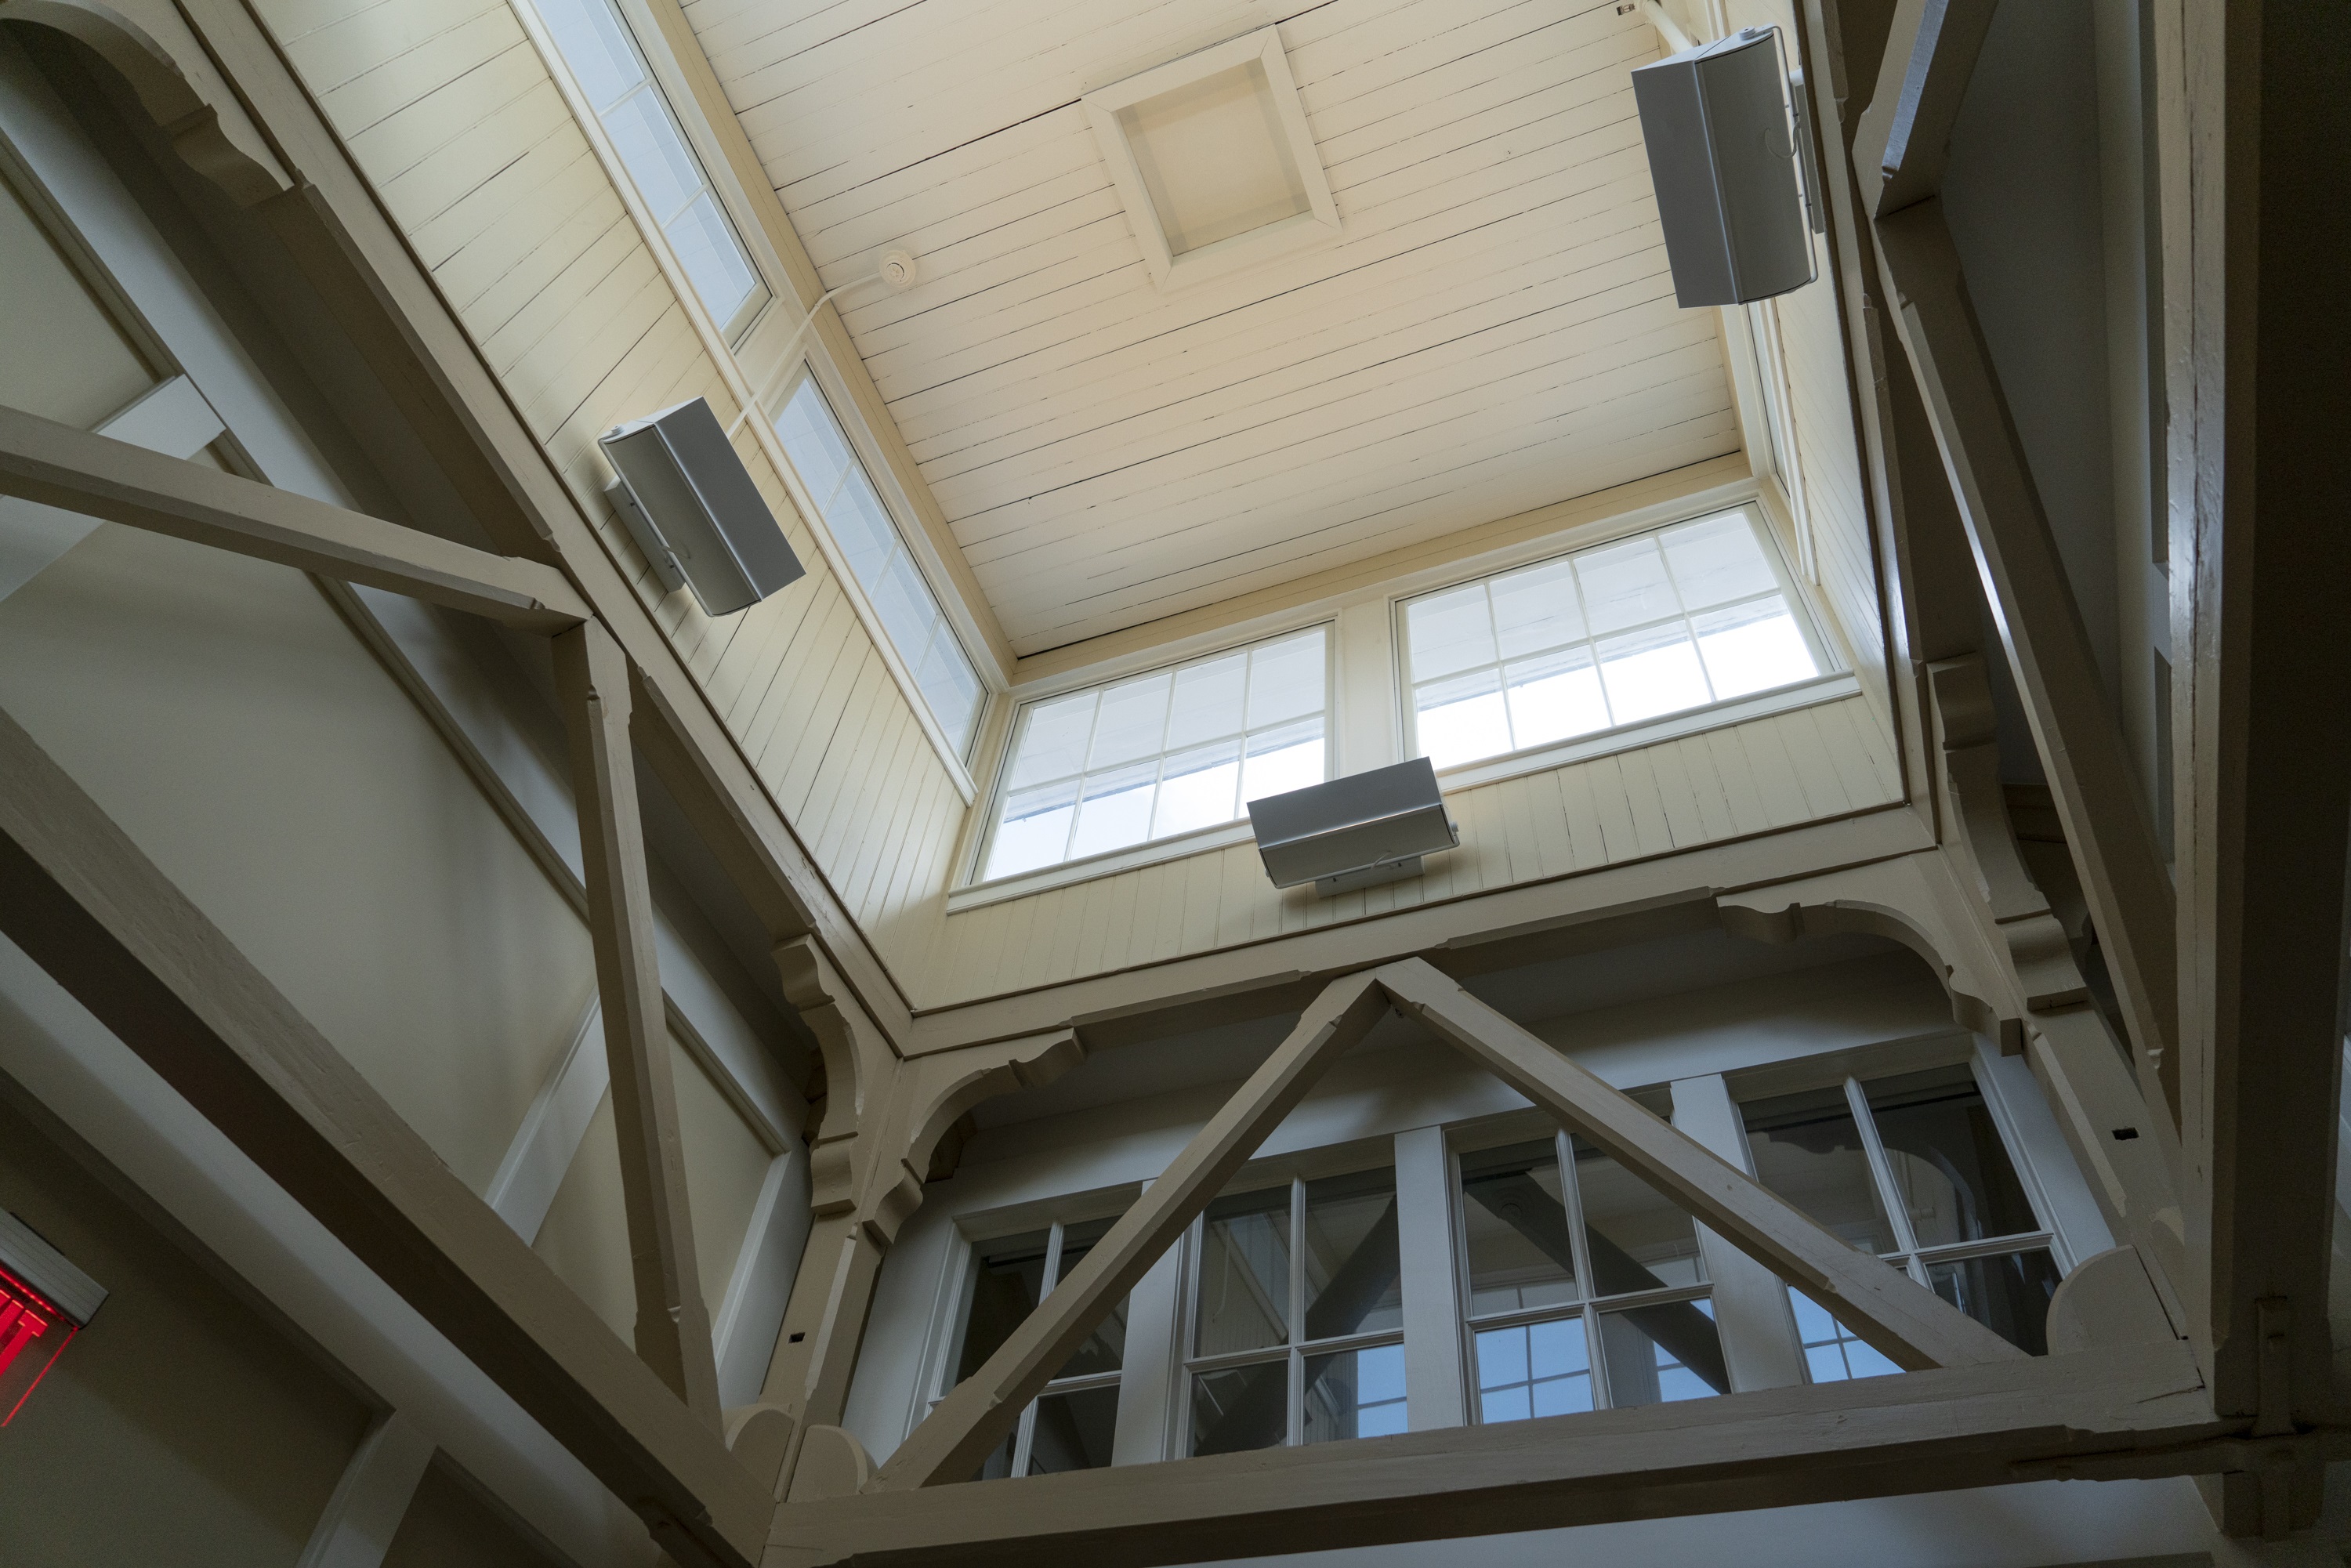 A site investigation at Washington and Lee University’s Newcomb Hall revealed trusses and a light well hidden beneath the building’s cupola. They had been covered by ductwork and dropped ceilings. The renovation design incorporated the features, adding natural light and character to the building.